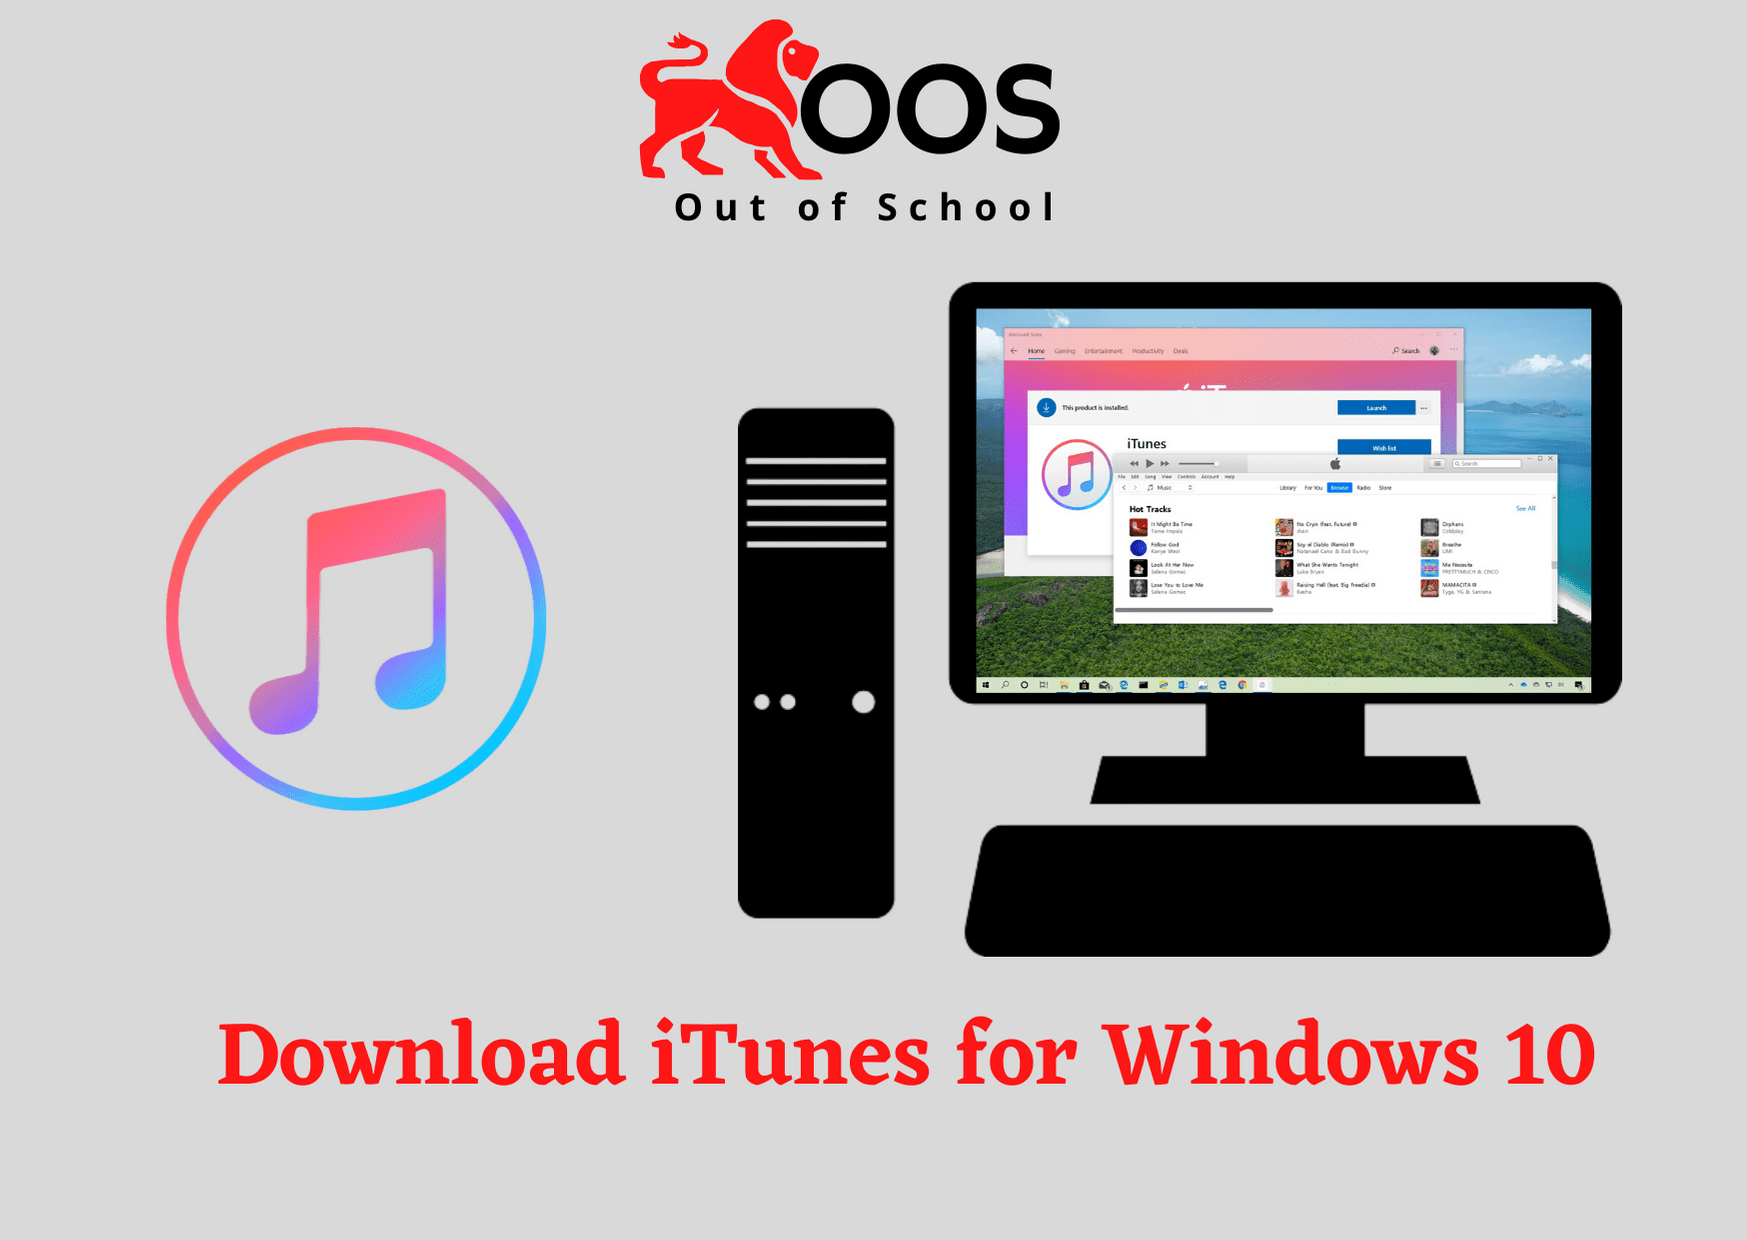 itunes download for windows 10 latest version